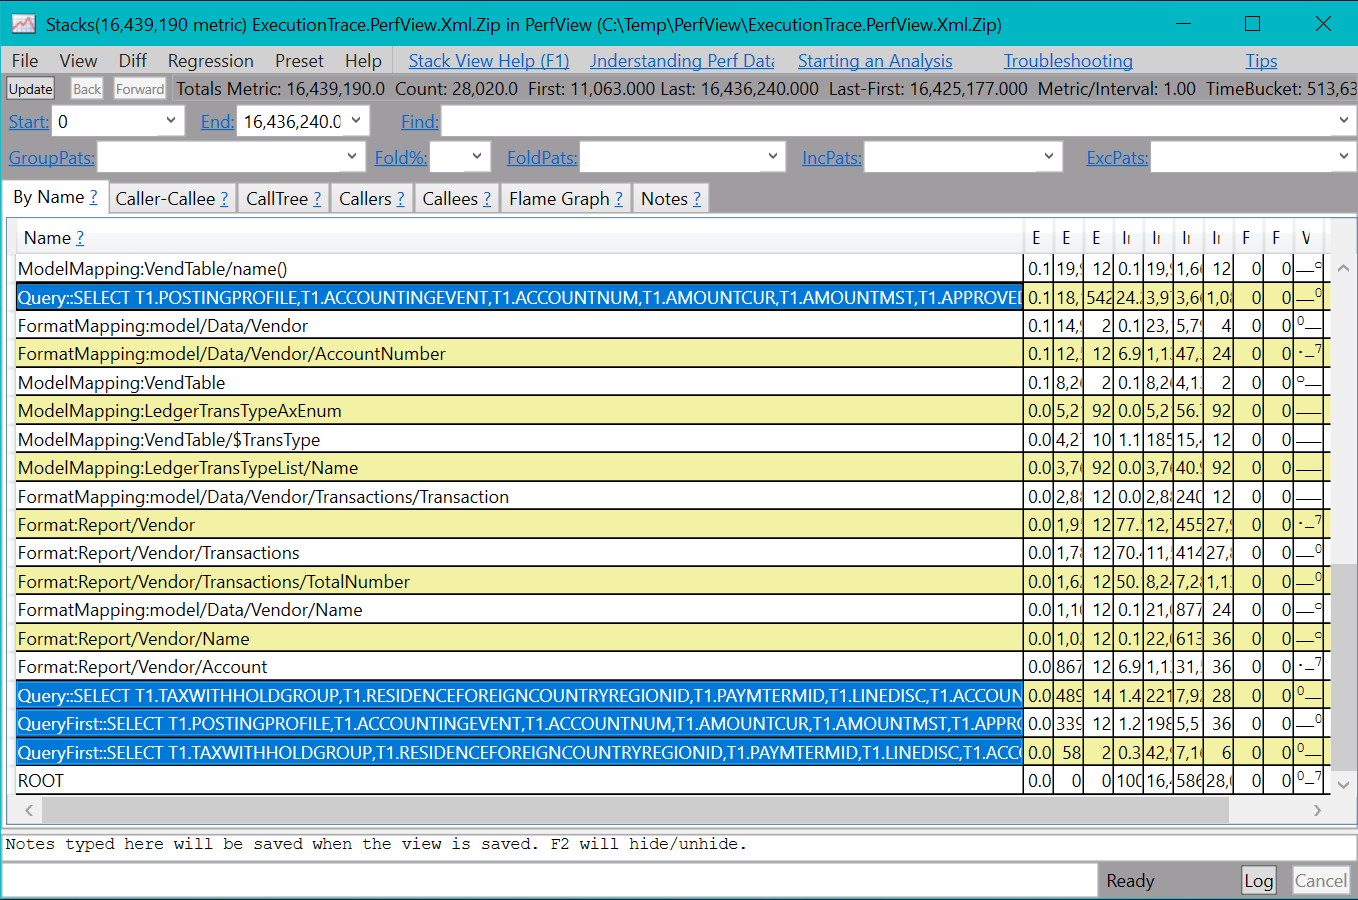 Trace information for the executed ER format in PerfView.